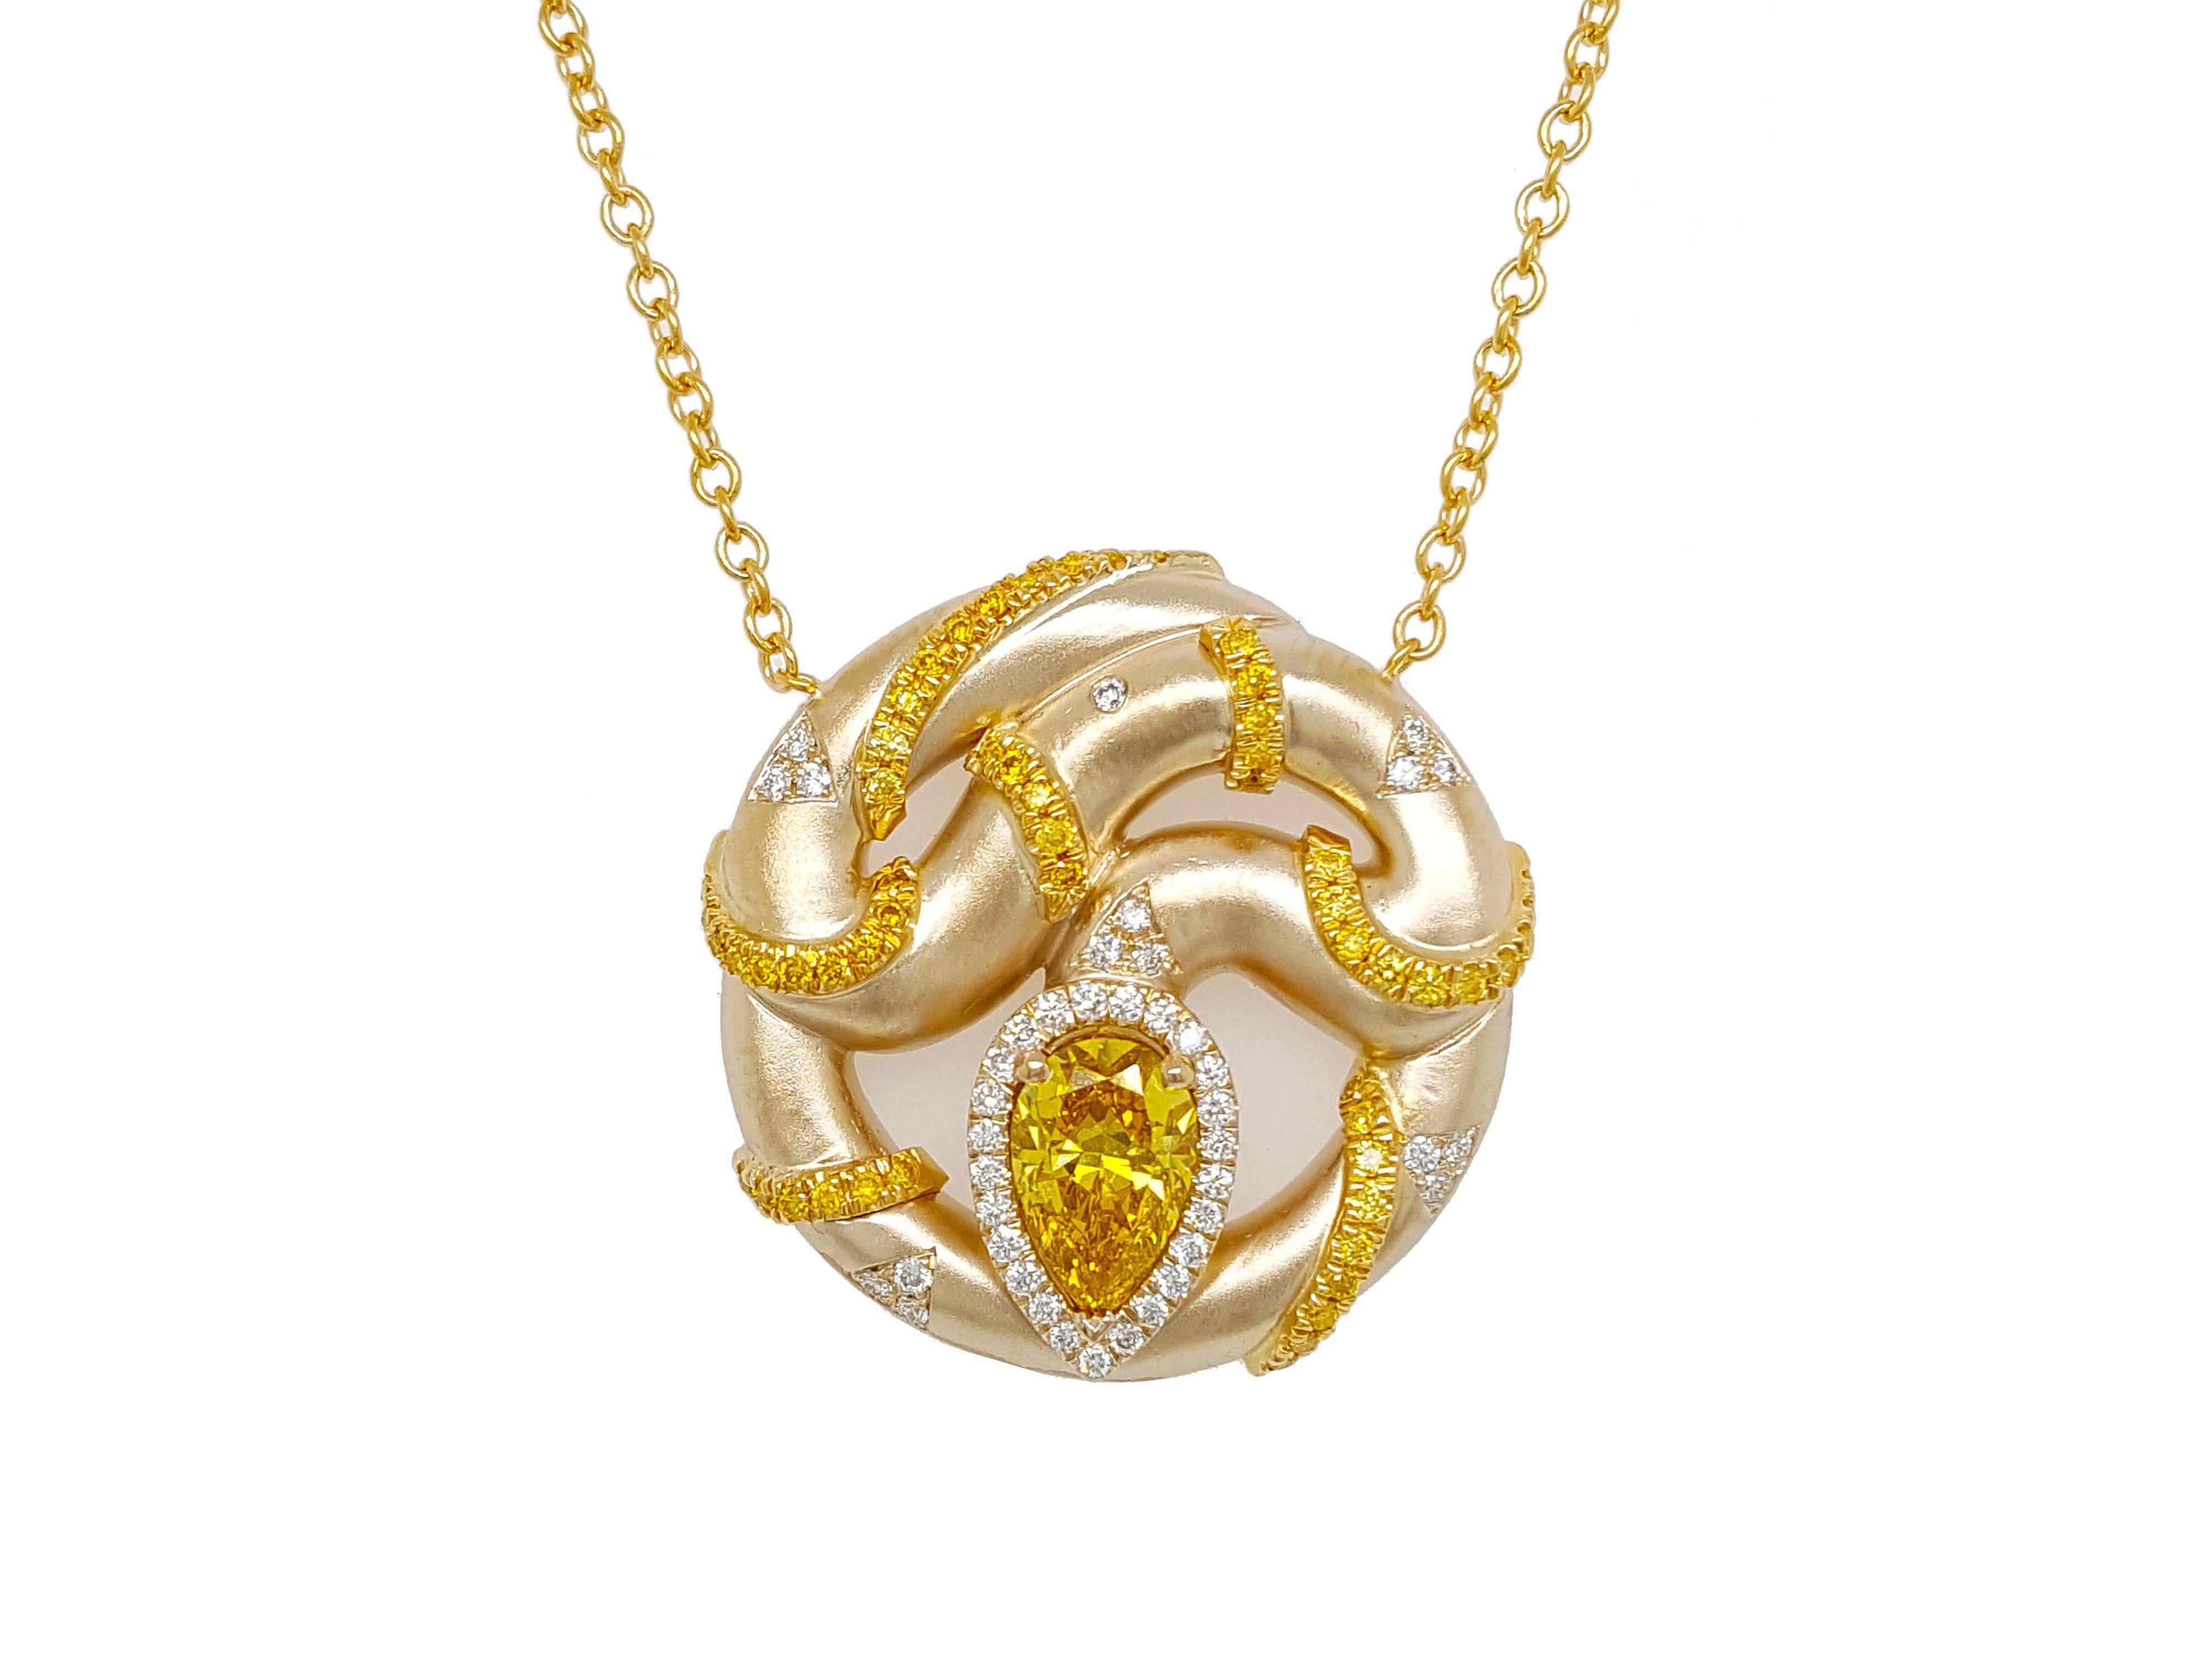 Contemporary 1 Carat Fancy Vivid Yellow Diamond Pendant Necklace 18K Gold GIA Certified For Sale